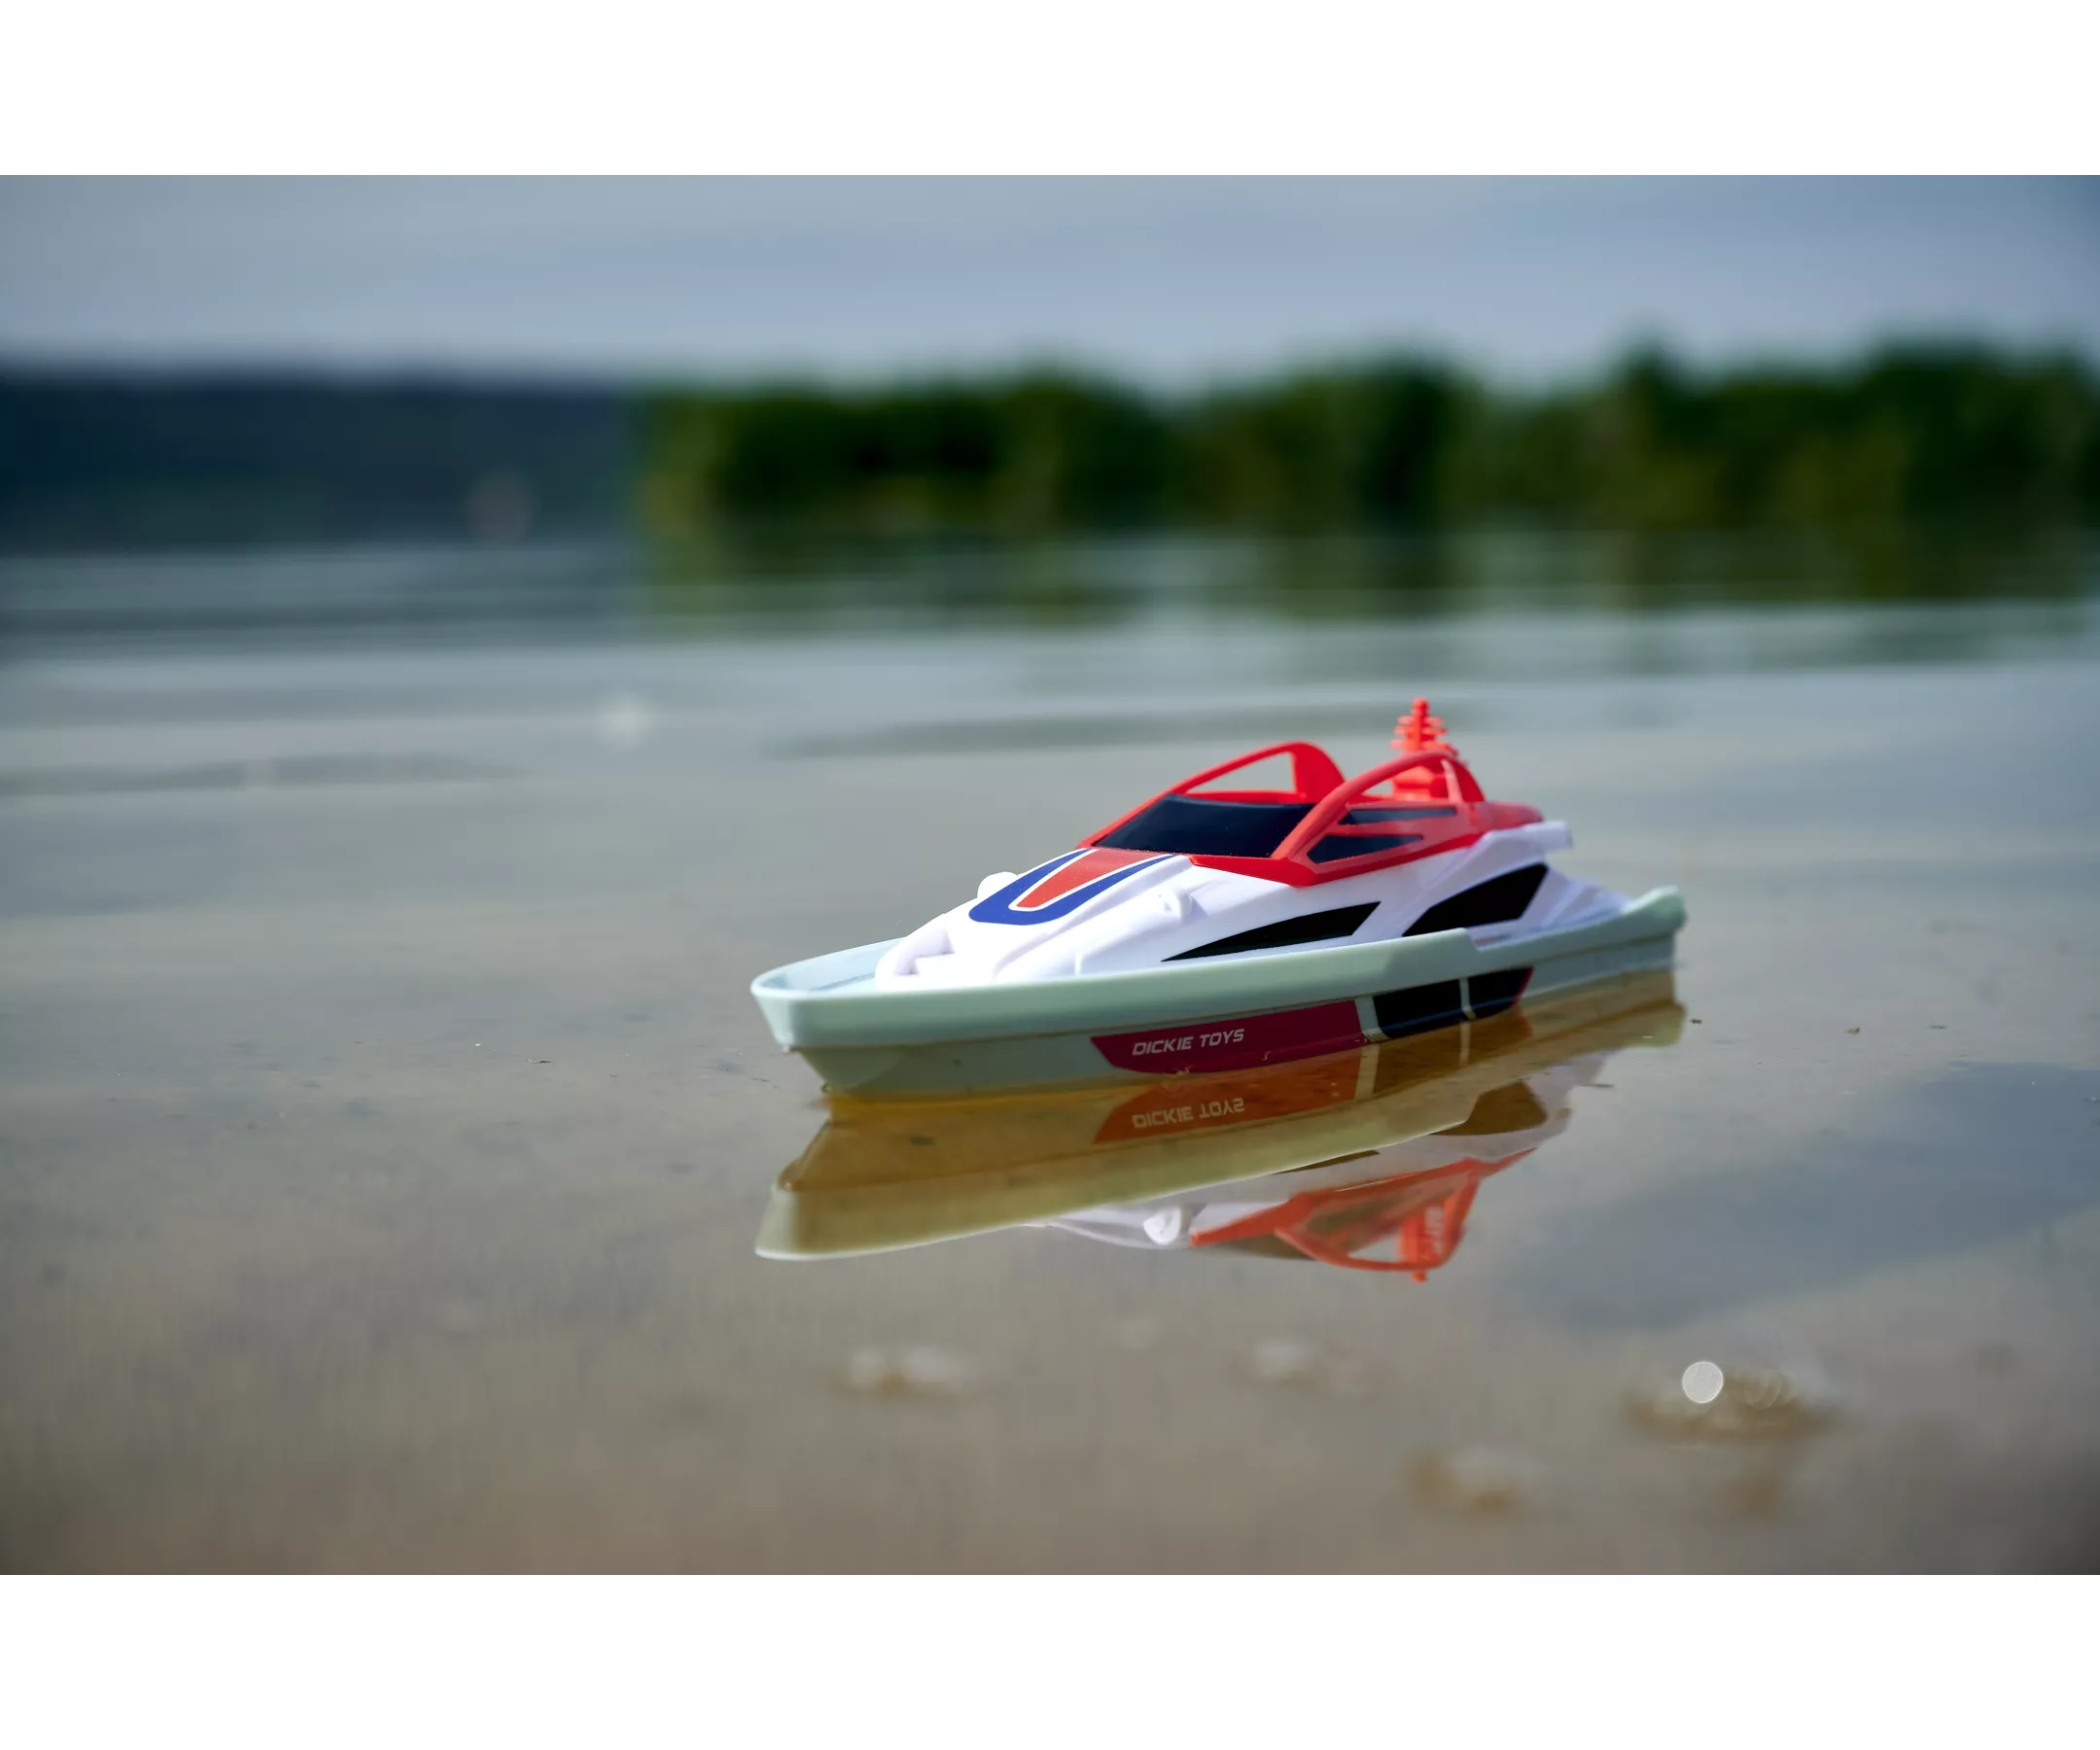 Dickie Toys RC Sea Cruiser, RTR (201106003)